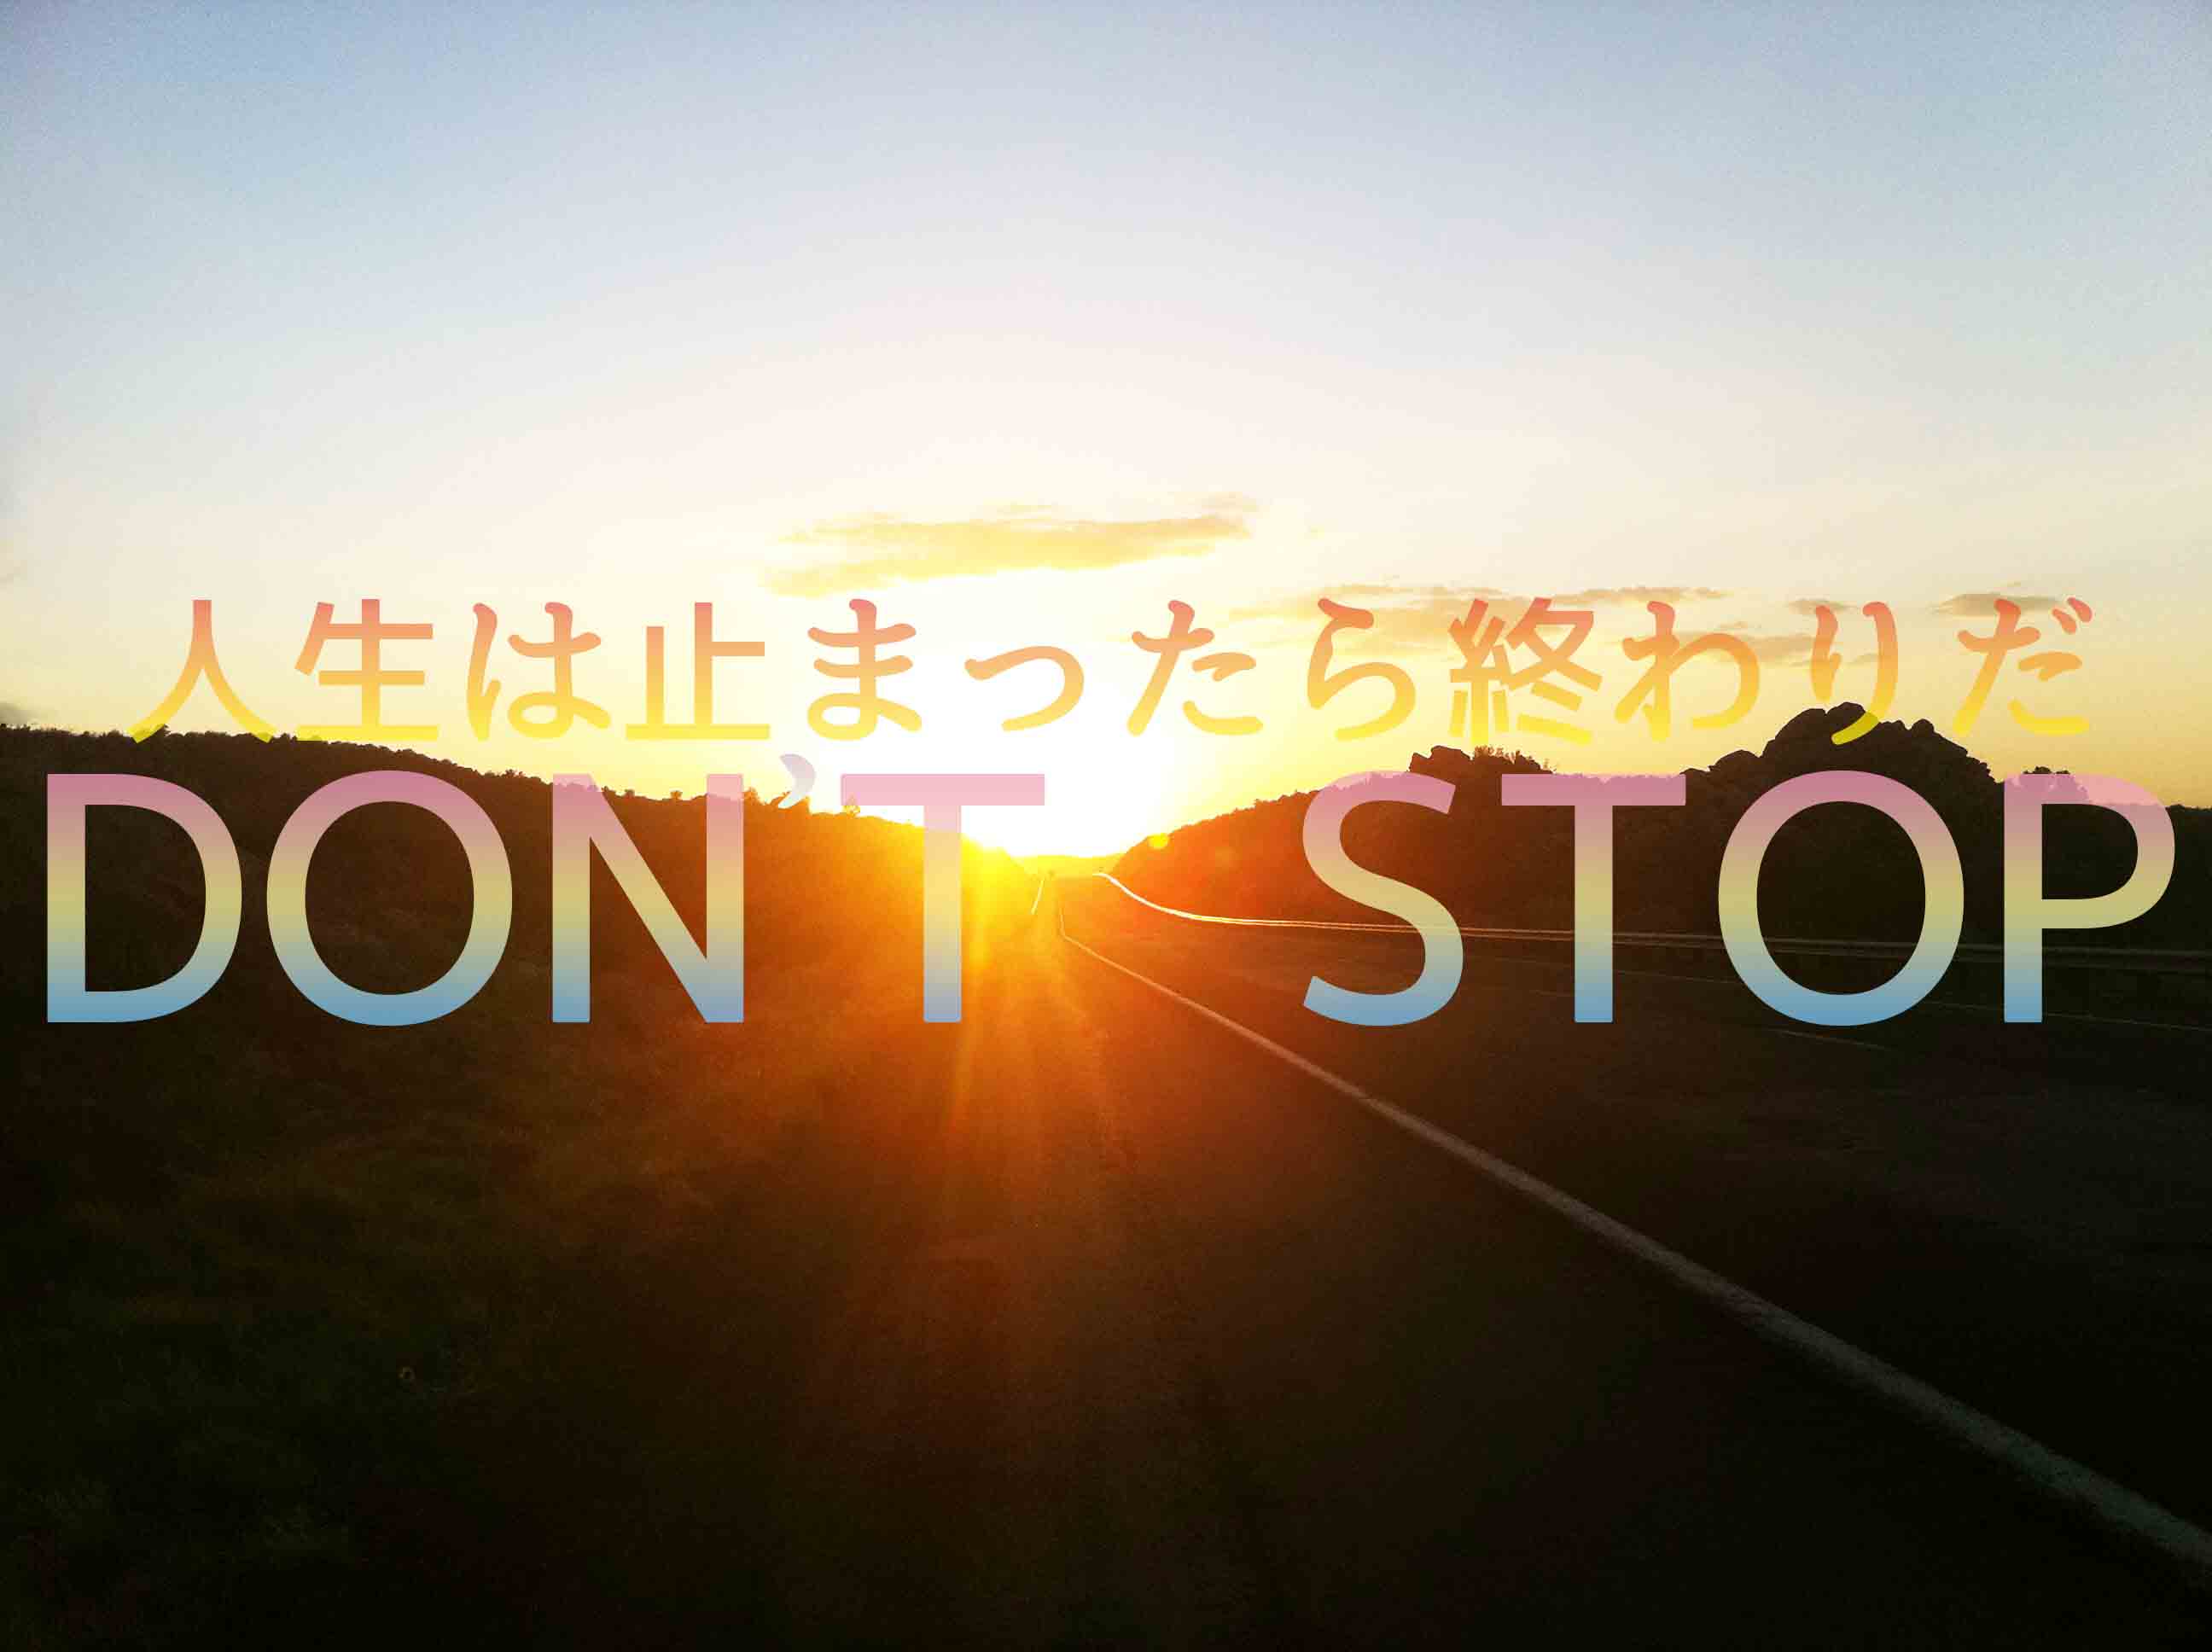 DON'T STOPの文字